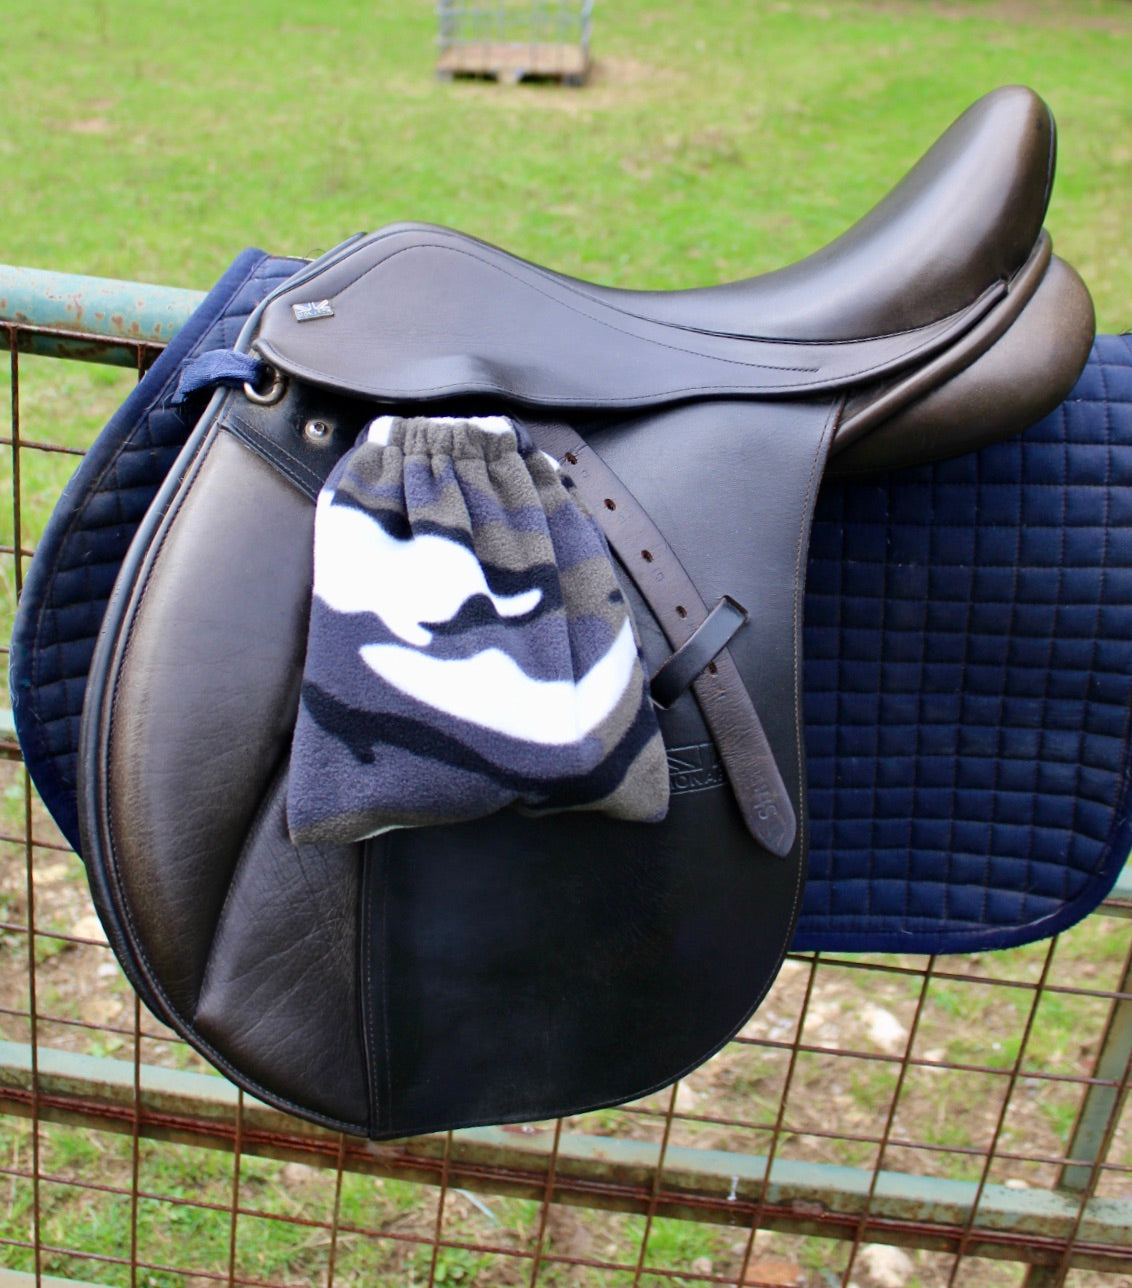 camouflage patterned stirrup covers, on a brown monarch saddle which has a navy le Mieux saddle pad under, on a field fence